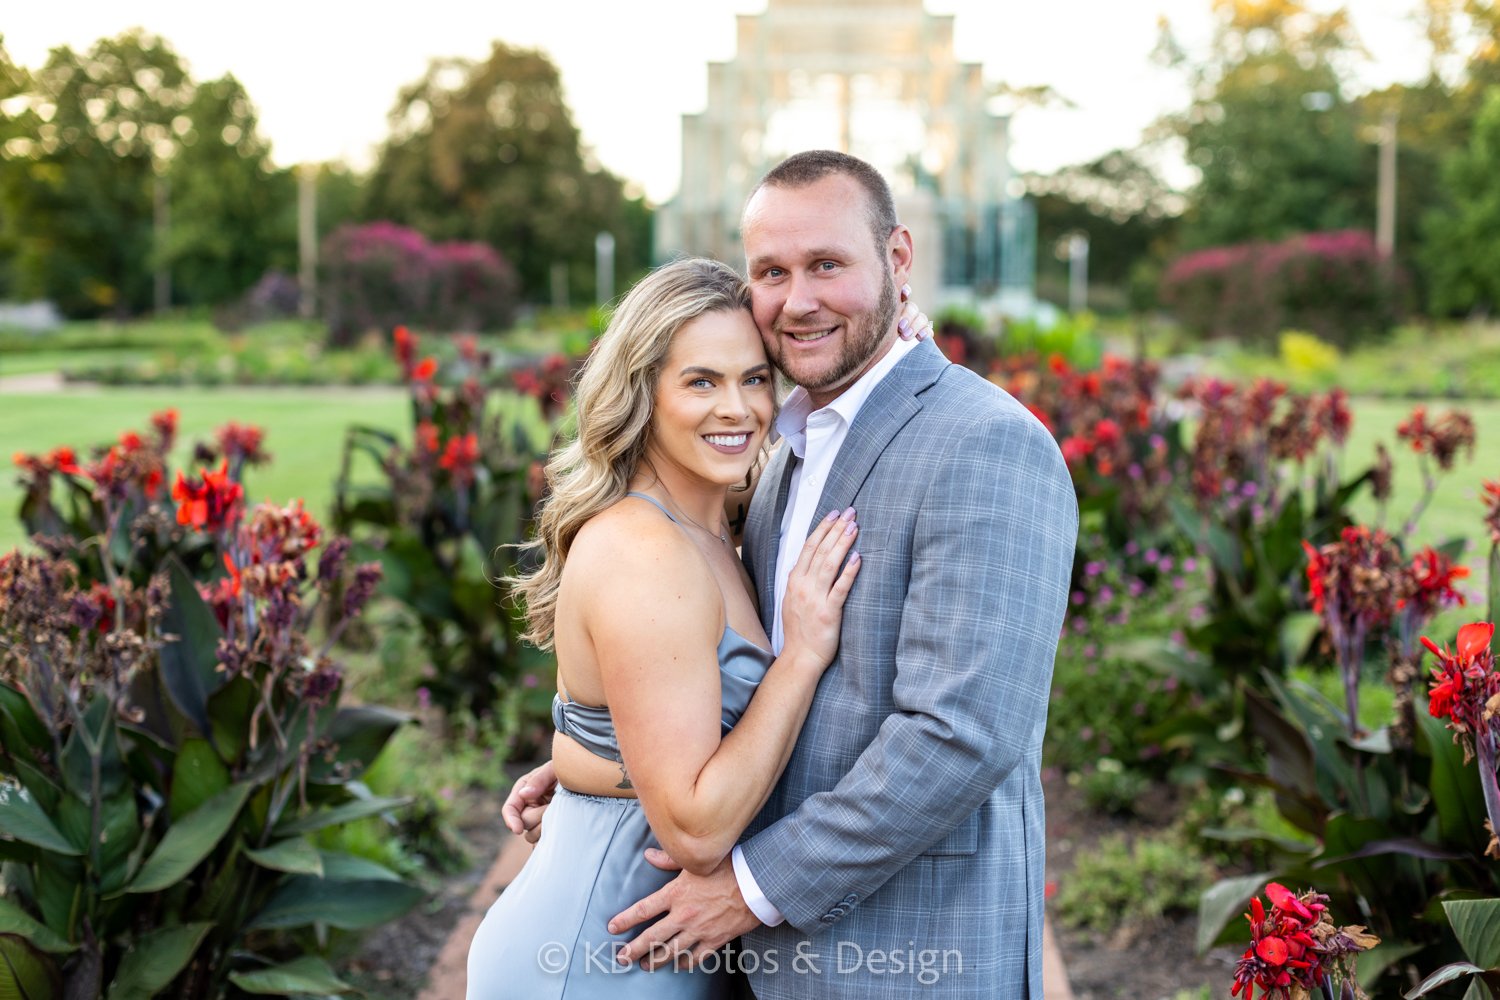 Taylor Drew engagement photography at St Louis Missouri STL Jewel Box in Forest Park with best engagement wedding photographer KB Photos and Design of St. Louis Chesterfield Missouri